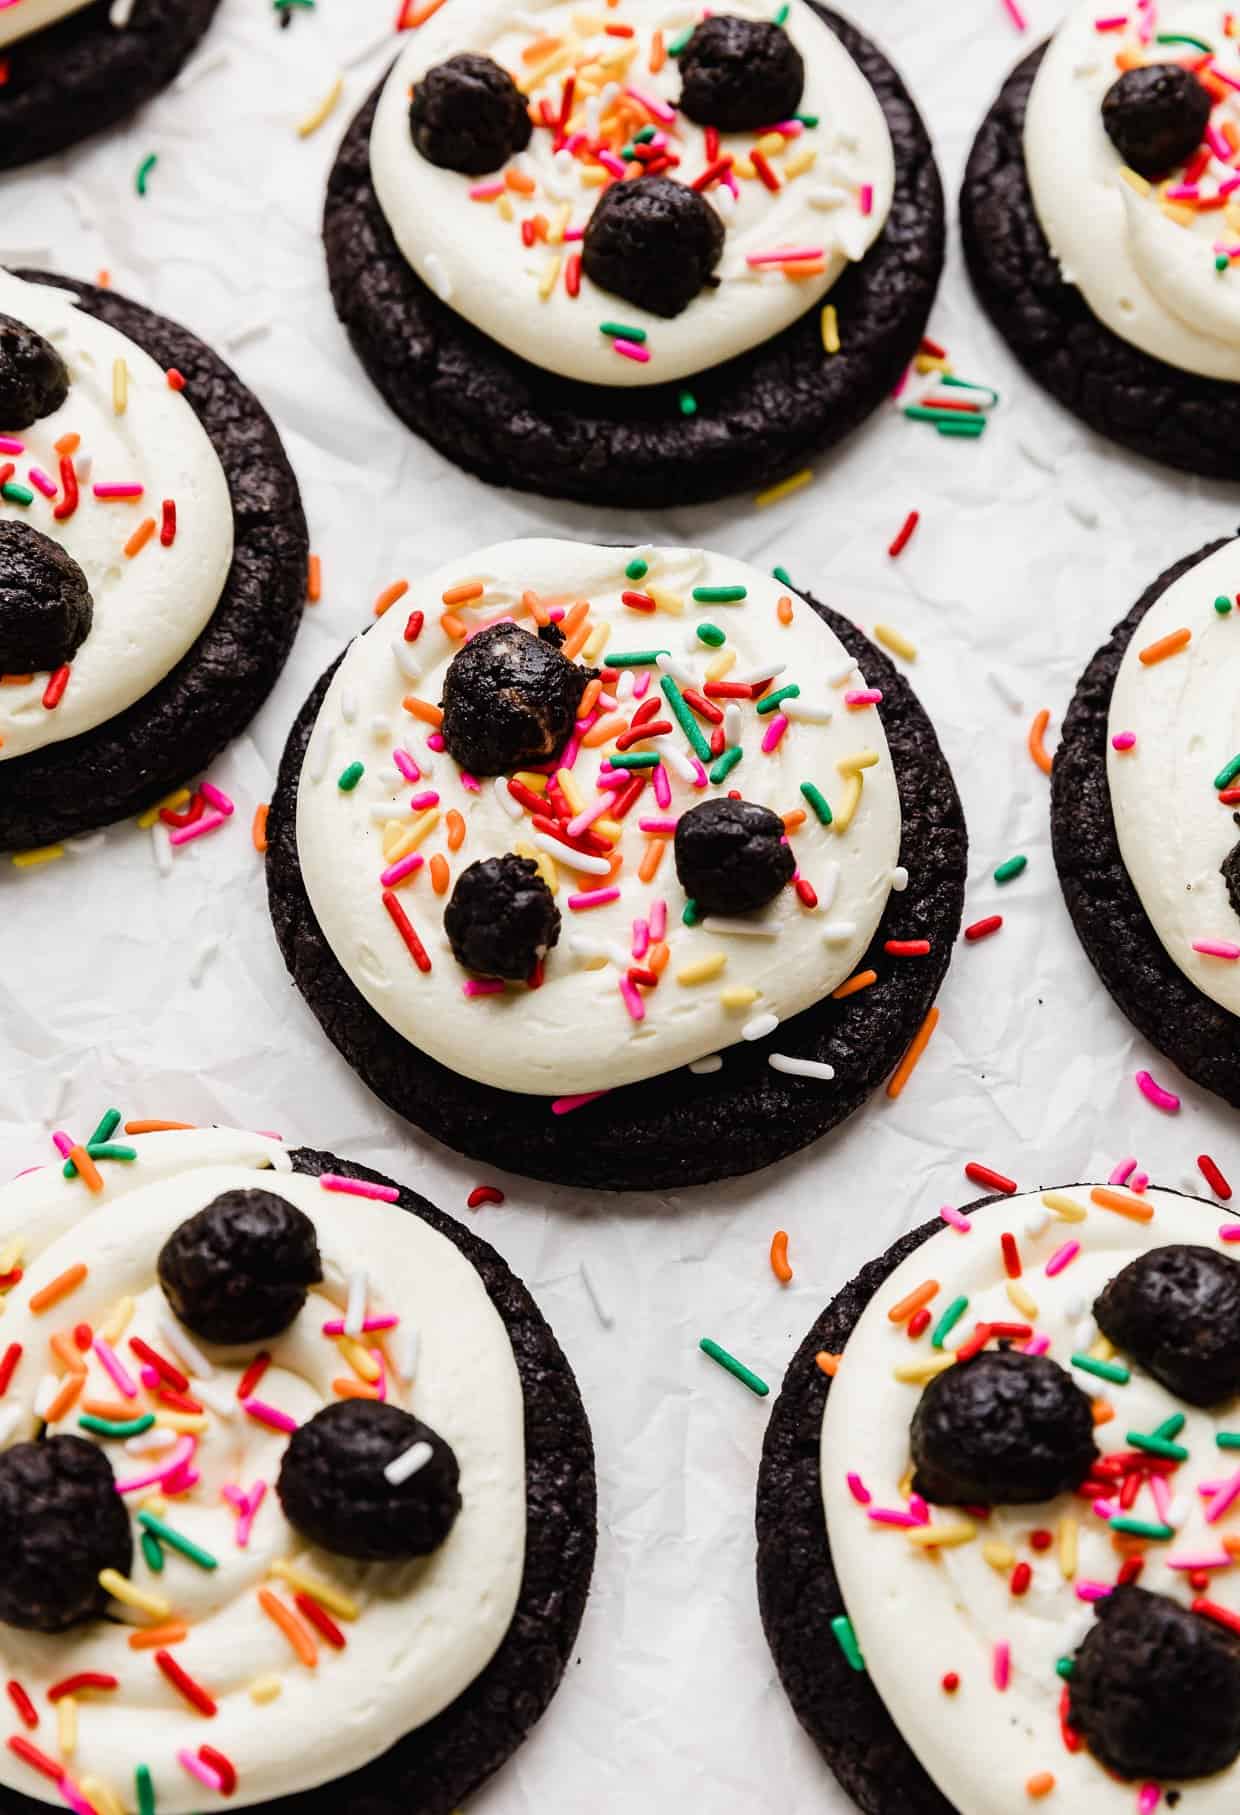 Oreo Birthday Cake Cookies topped with a white frosting, colored sprinkles and small Oreo truffles.